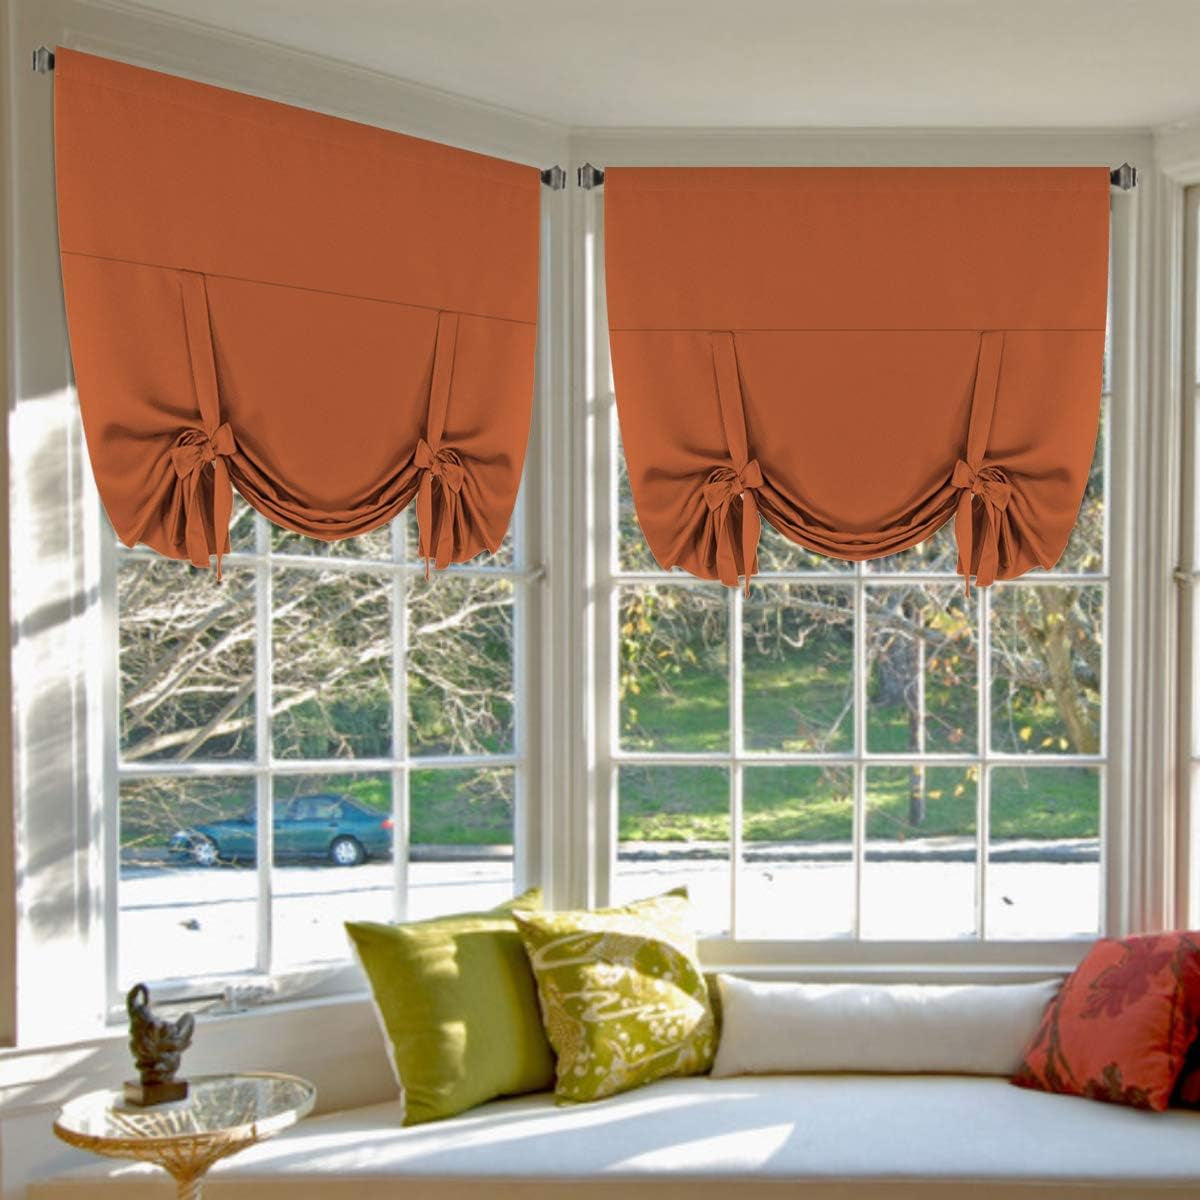 H.VERSAILTEX Tie up Curtain Thermal Insulated Room Darkening Rod Pocket Valance for Bedroom (Coral, 1 Panel, 42 Inches W X 63 Inches L)  H.VERSAILTEX Orange W42" X L63" 2-Pack 